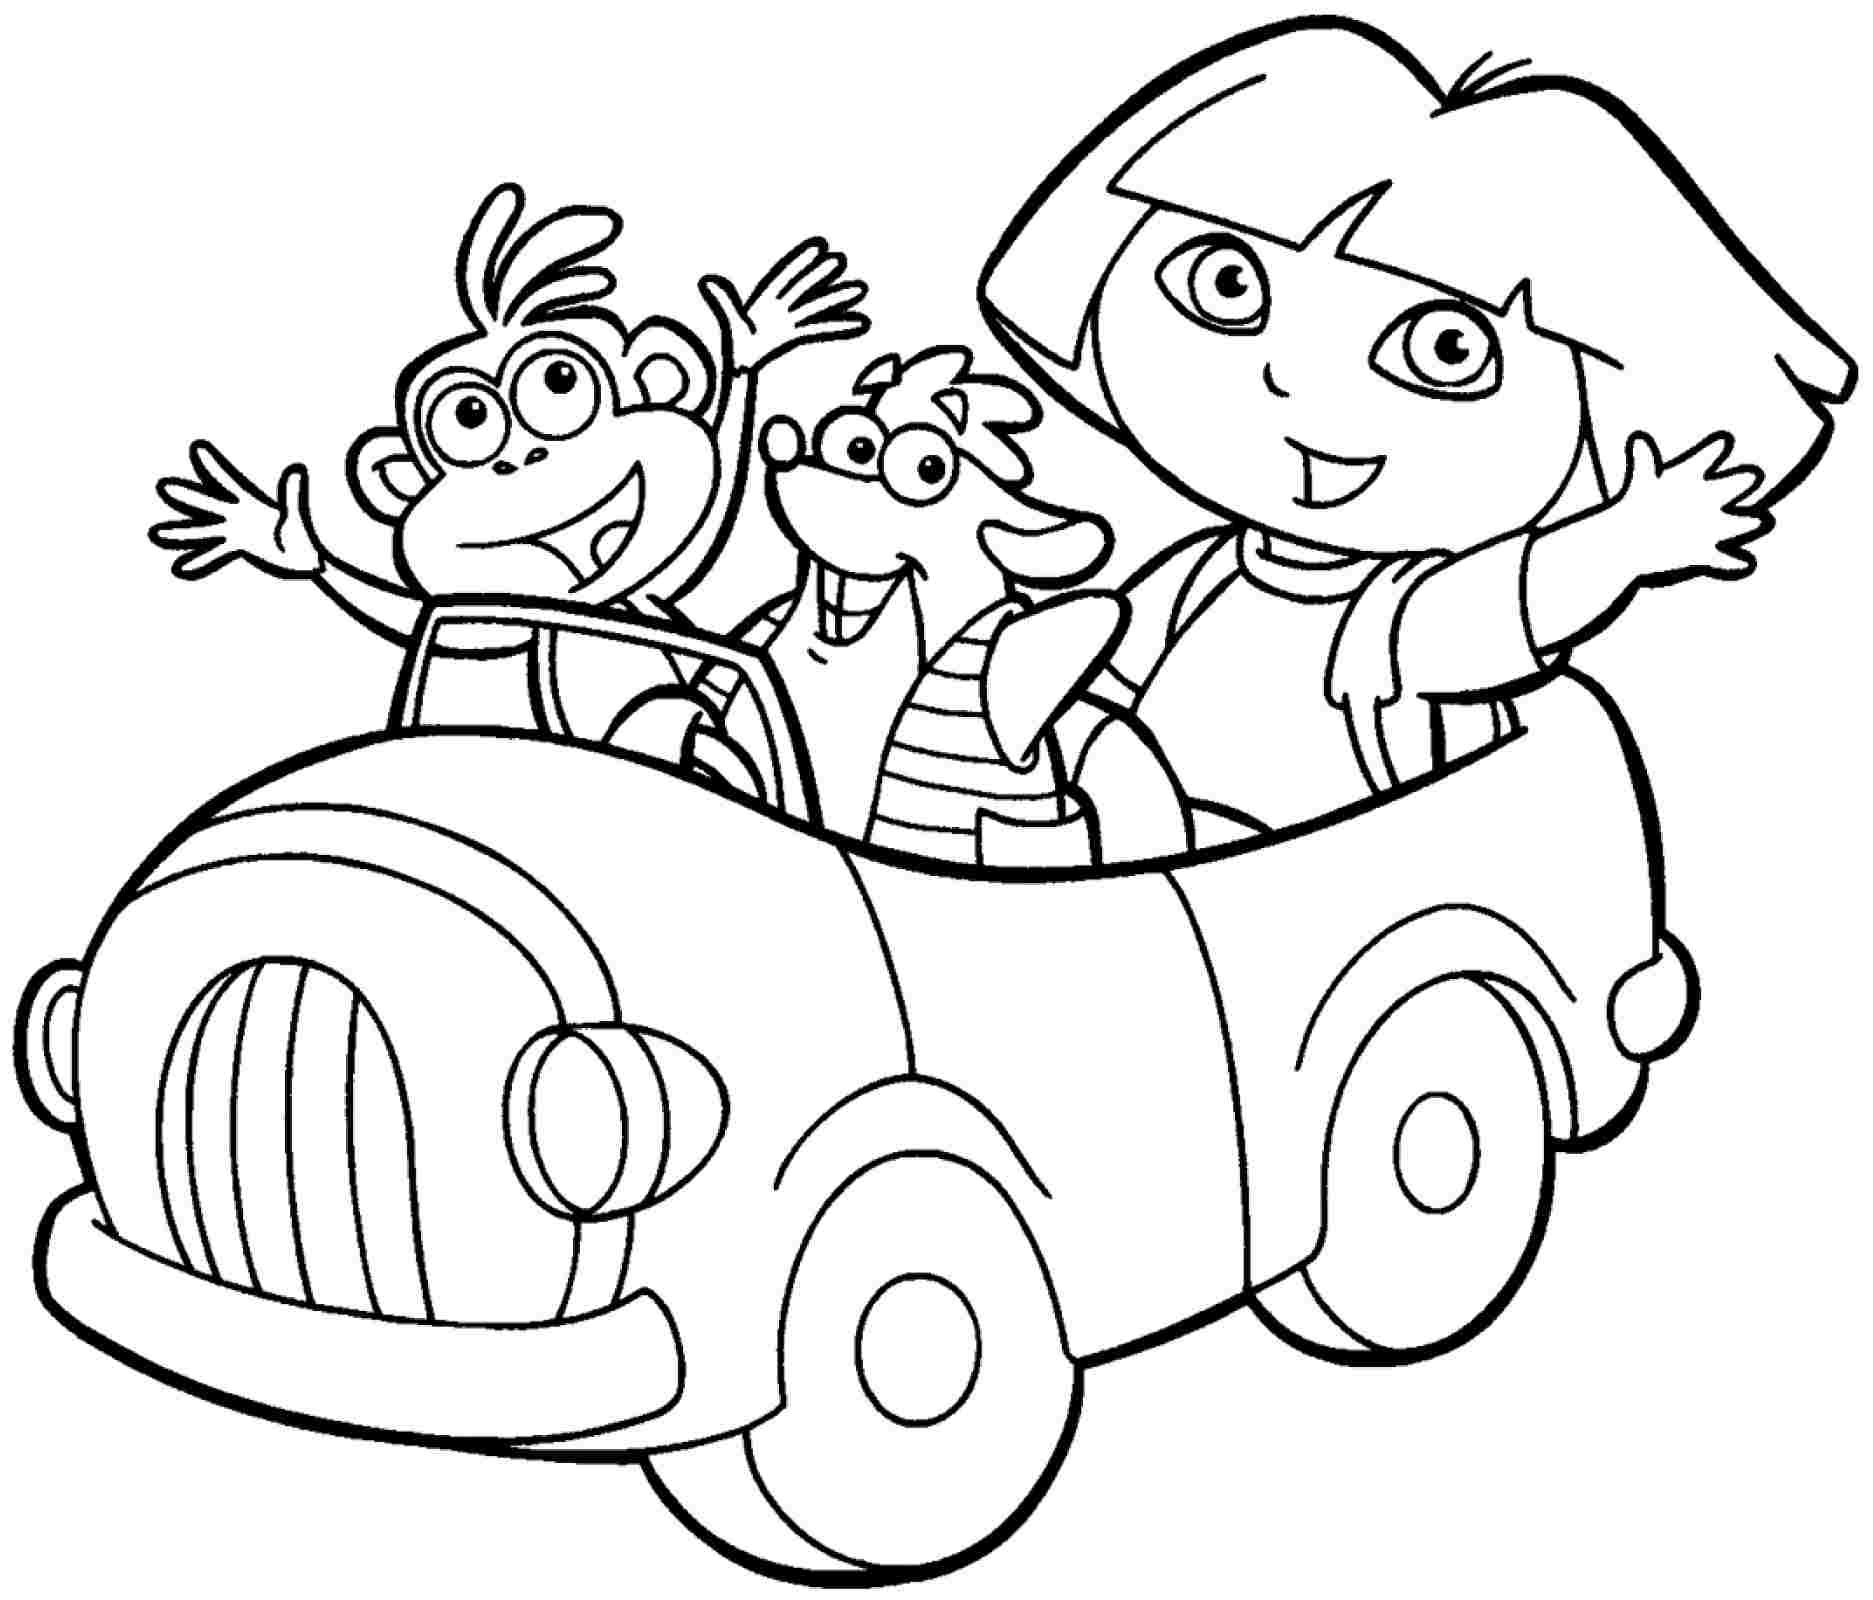 9 Pics of Dora And Friends Mermaid Coloring Pages - Dora and ...